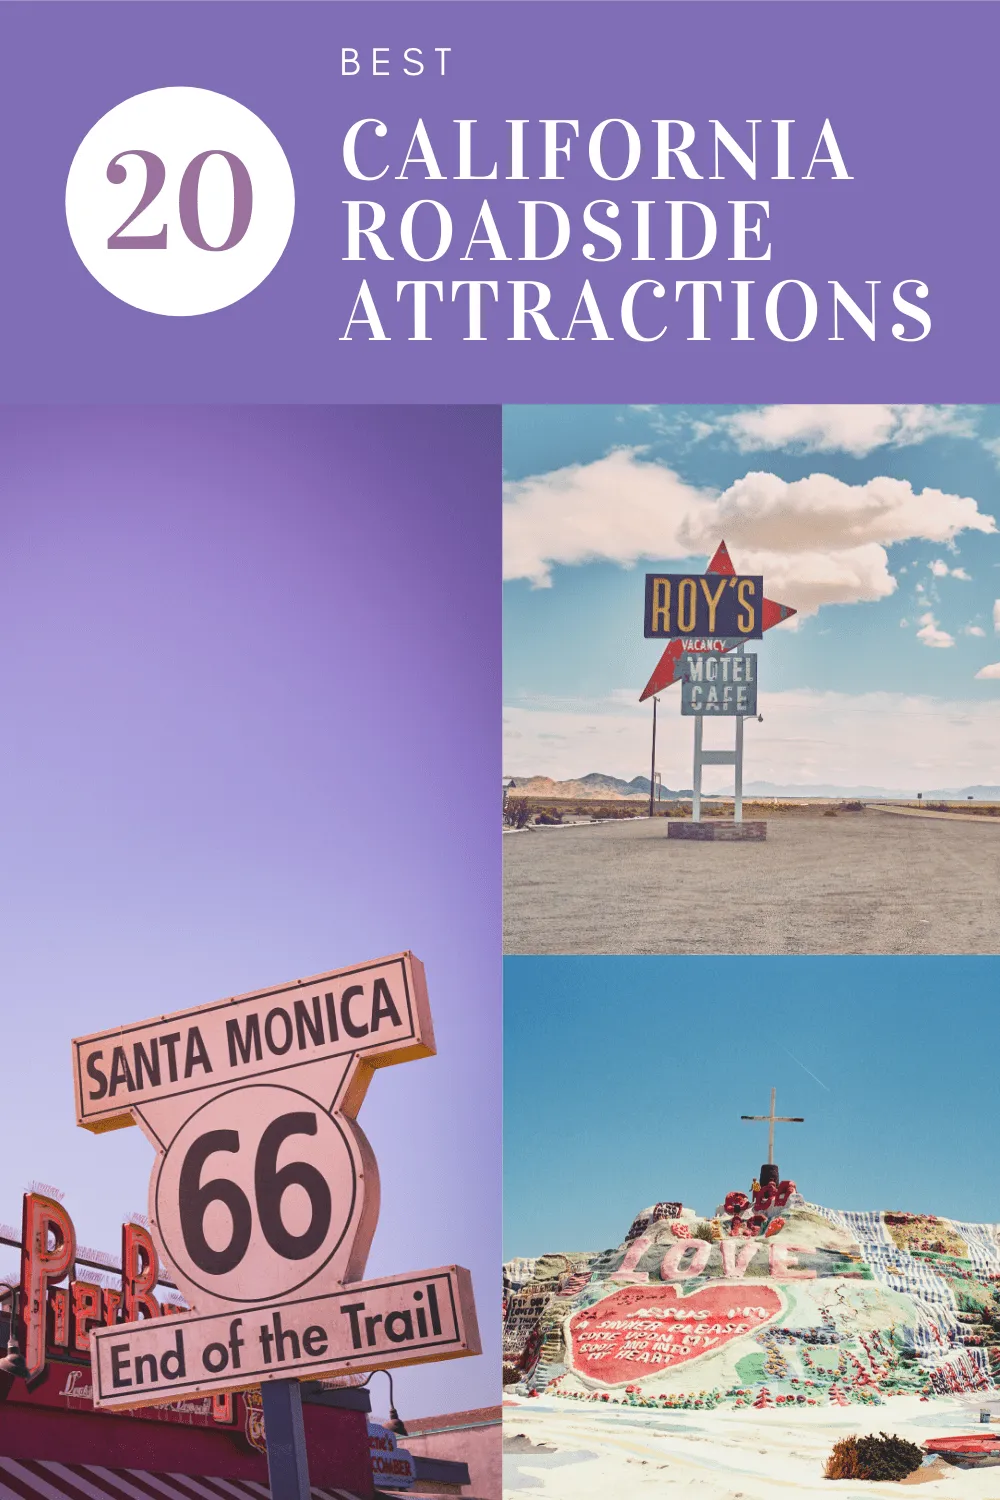 The best California roadside attractions to visit on a California road trip with kids or adults or a weekend getaway. Ideas for roadside oddities to add to your travel bucket list or itinerary! #California #CaliforniaRoadsideAttractions #CaliforniaRoadsideAttraction #RoadsideAttraction #RoadsideAttractions #RoadTrip #CaliforniaRoadTrip #CaliforniaRoadTripItinerary #CaliforniaRoadTripStops ##CaliforniaRoadTripIdeas #CaliforniaRoadTripMap #CaliforniaBudgetRoadTrip #WeirdRoadsideAttractions